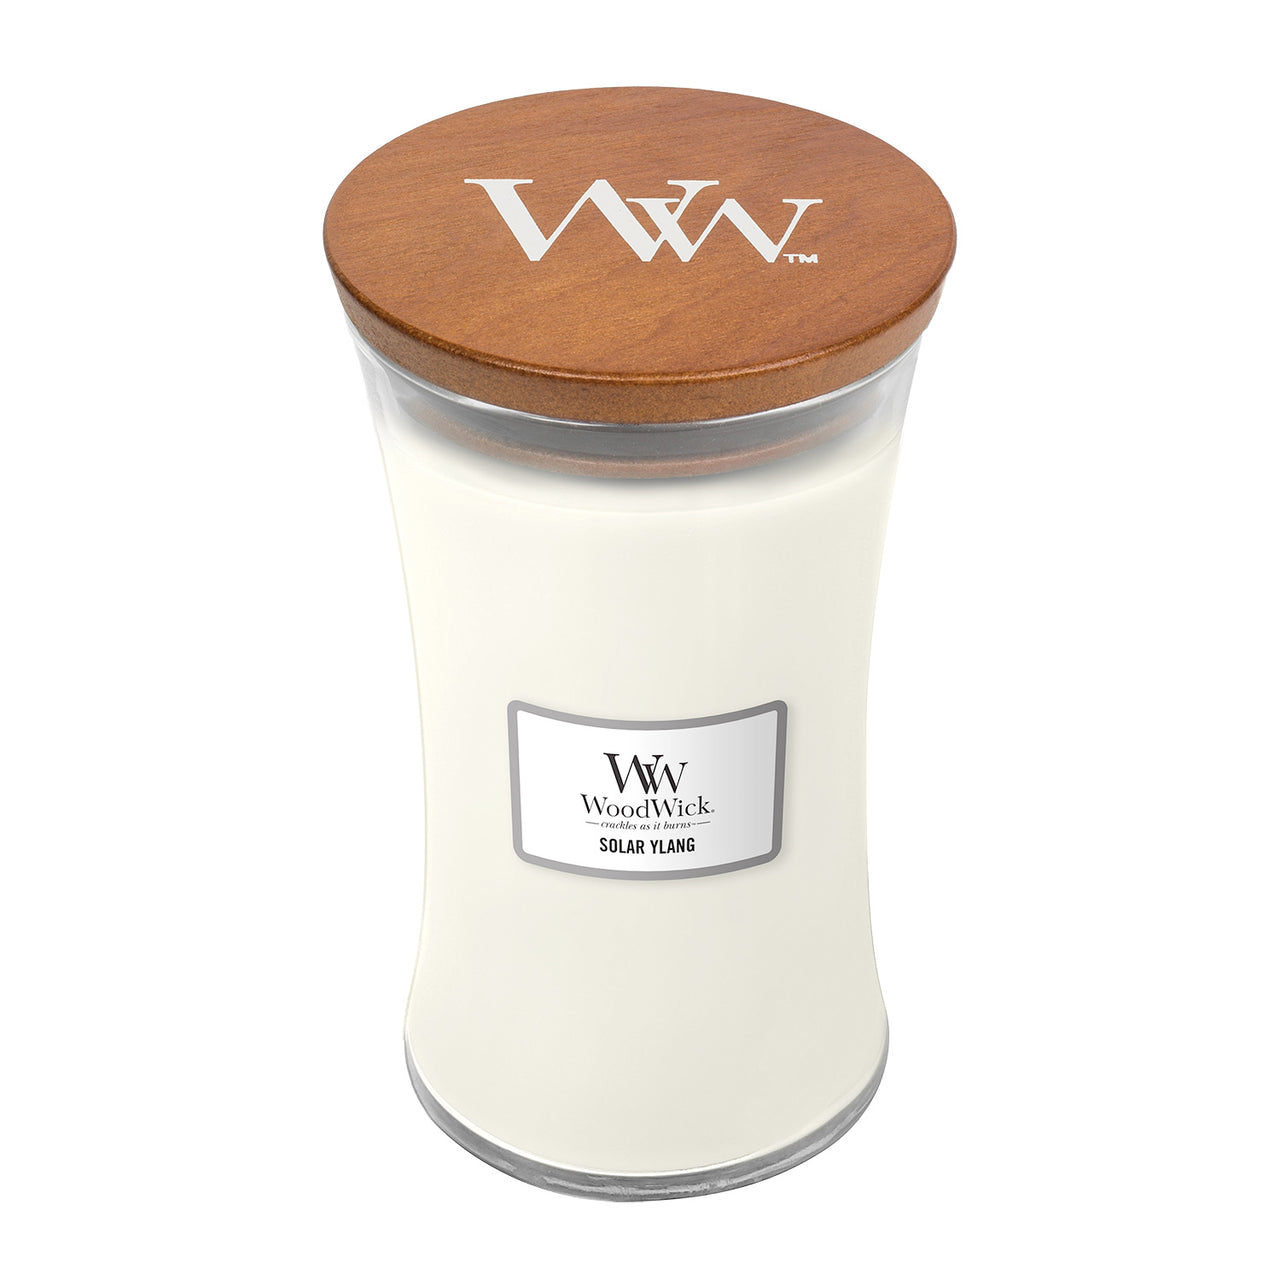 WoodWick Solar Ylang Soy Candle